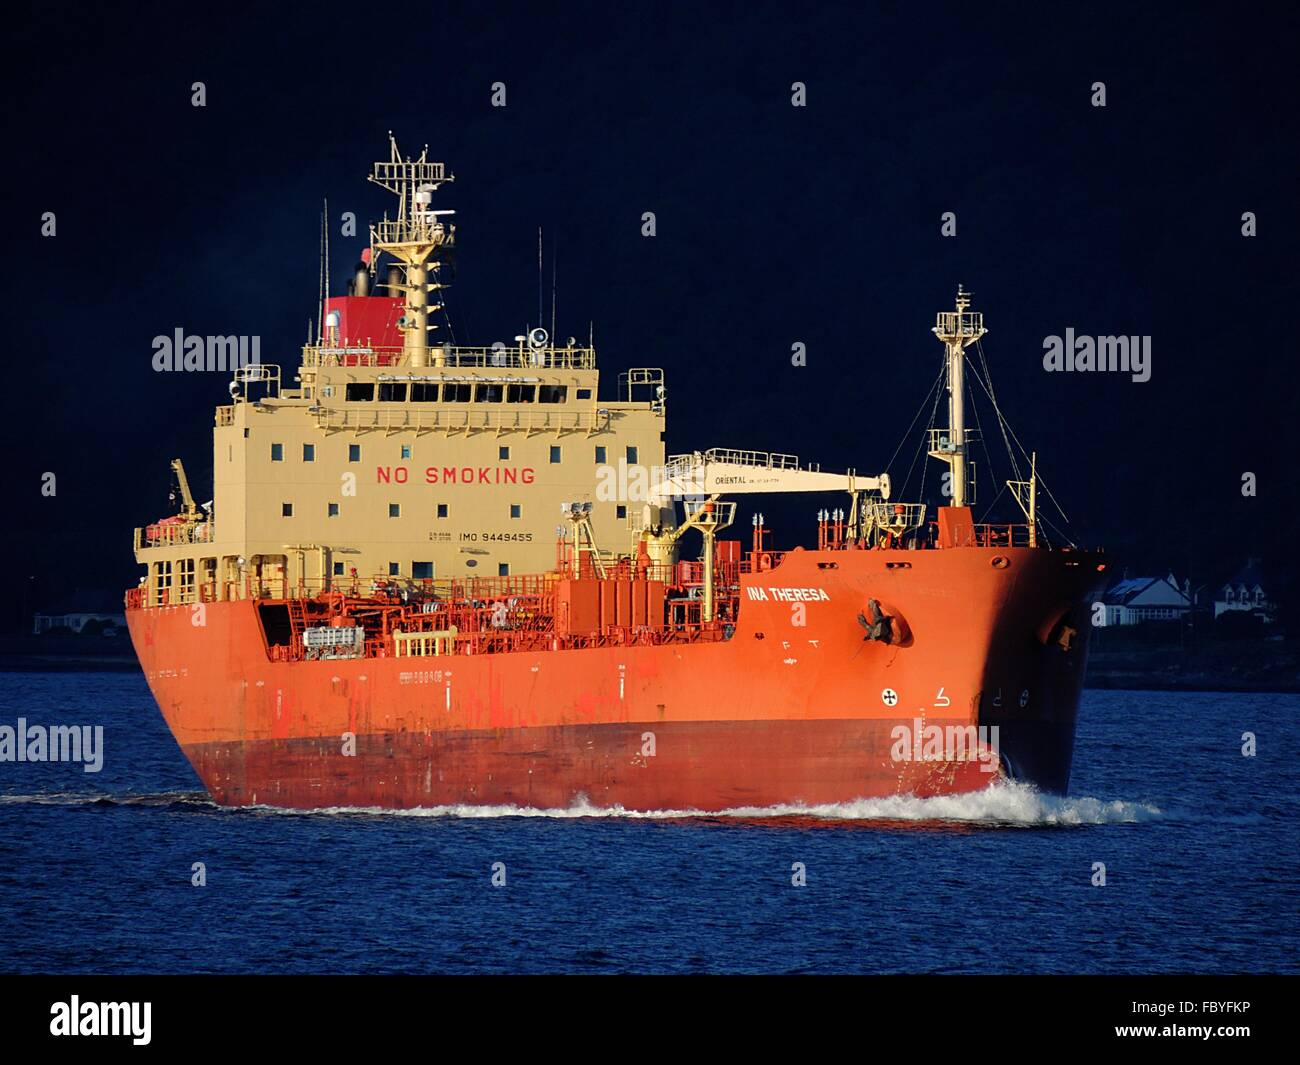 Ina Theresa, a chemical/oil tanker registered in Majuro, Marshall Islands, approaches Cloch Point in Gourock. Stock Photo